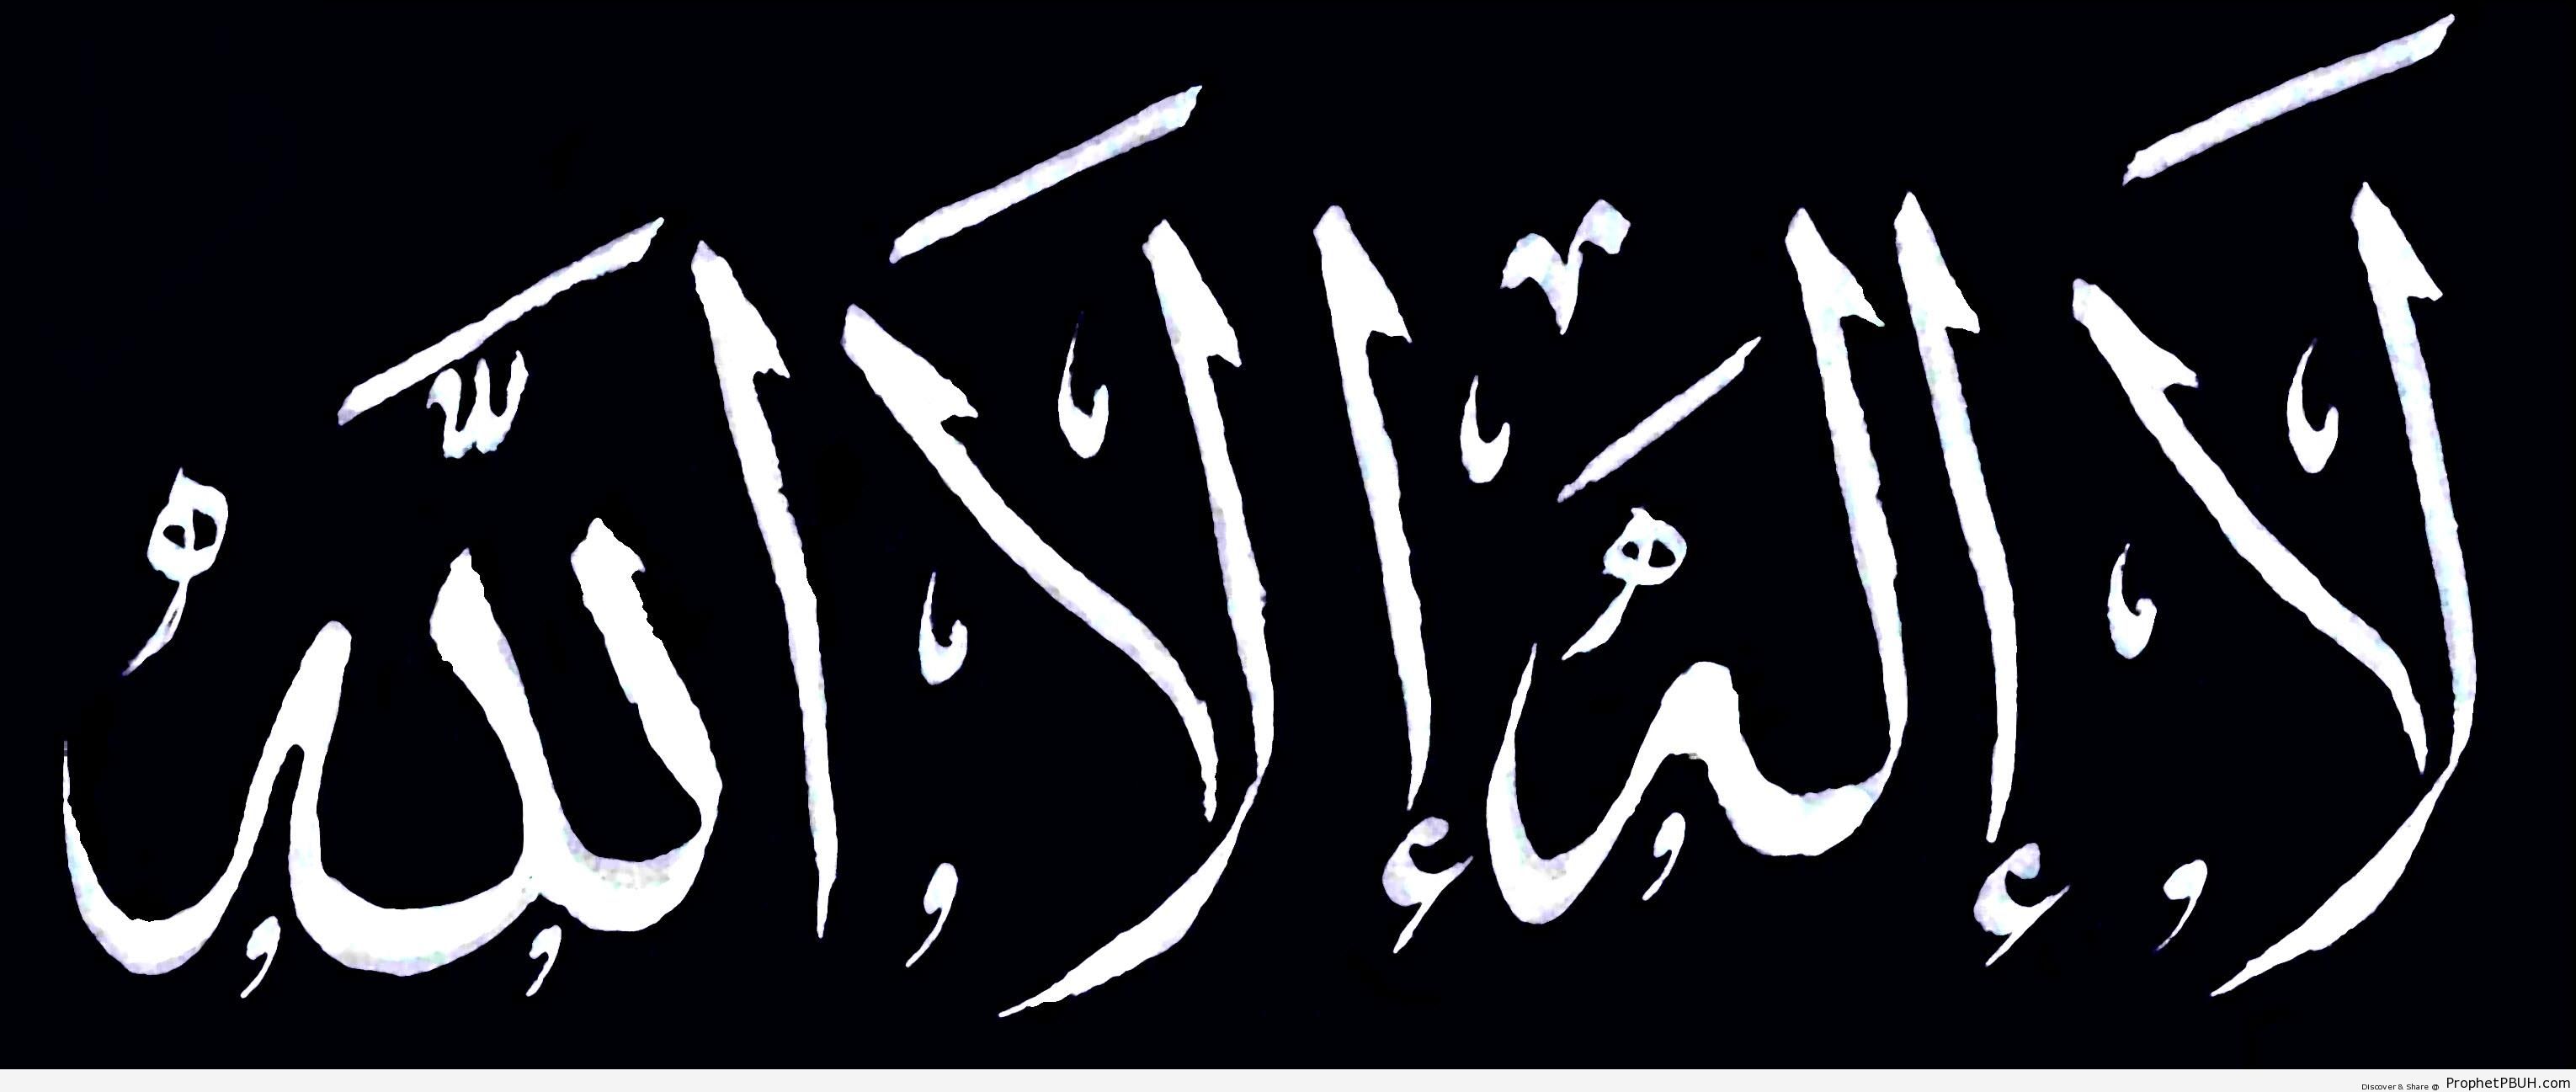 Shahdah Calligraphy on Black - Islamic Calligraphy and Typography 